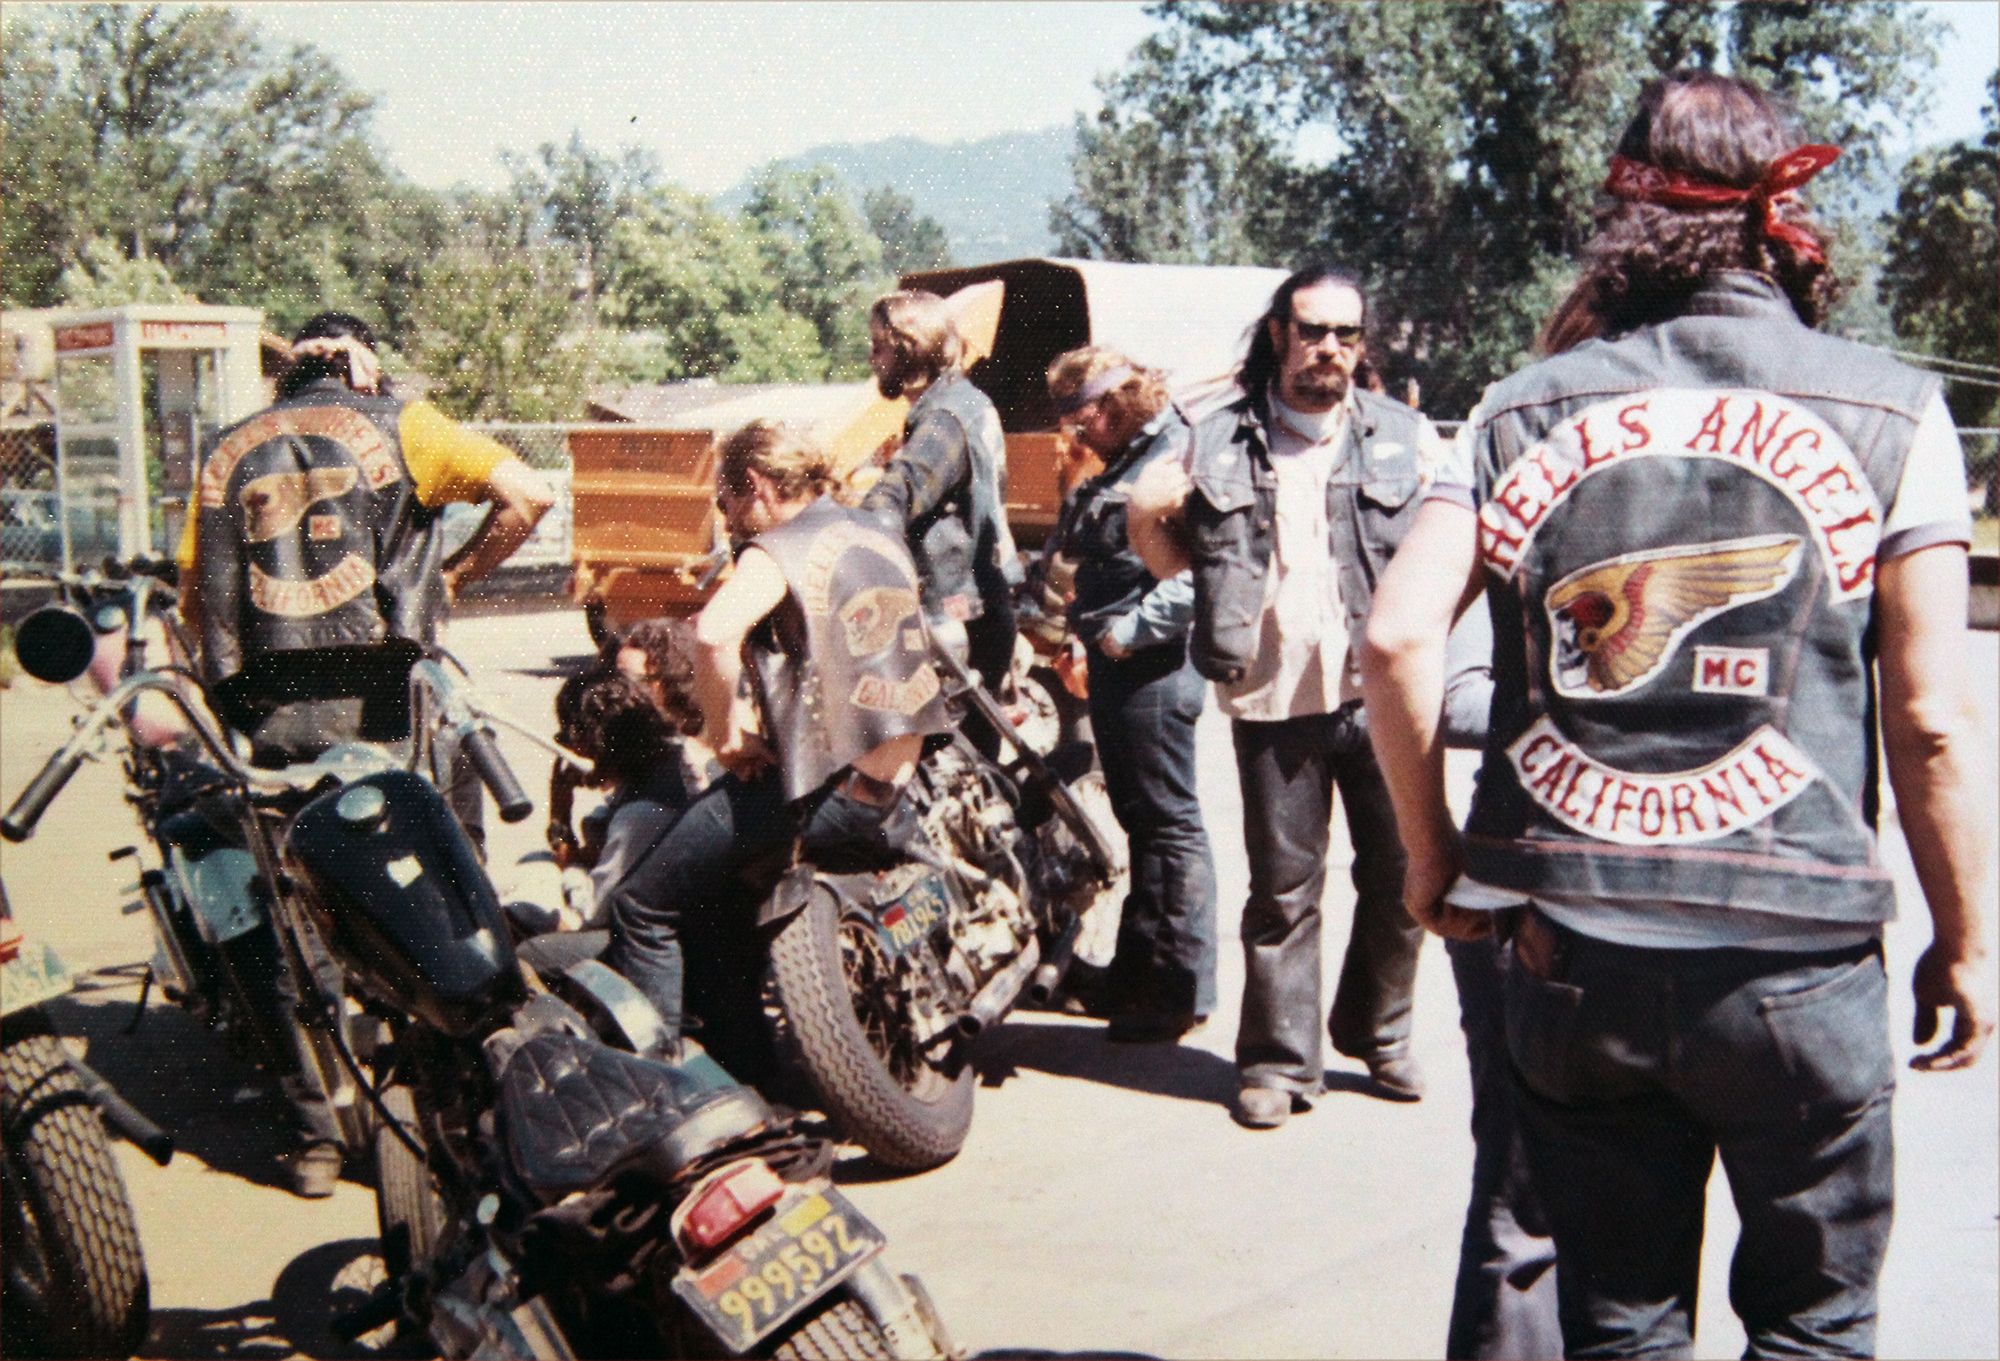 Hell's Angels California gather outside